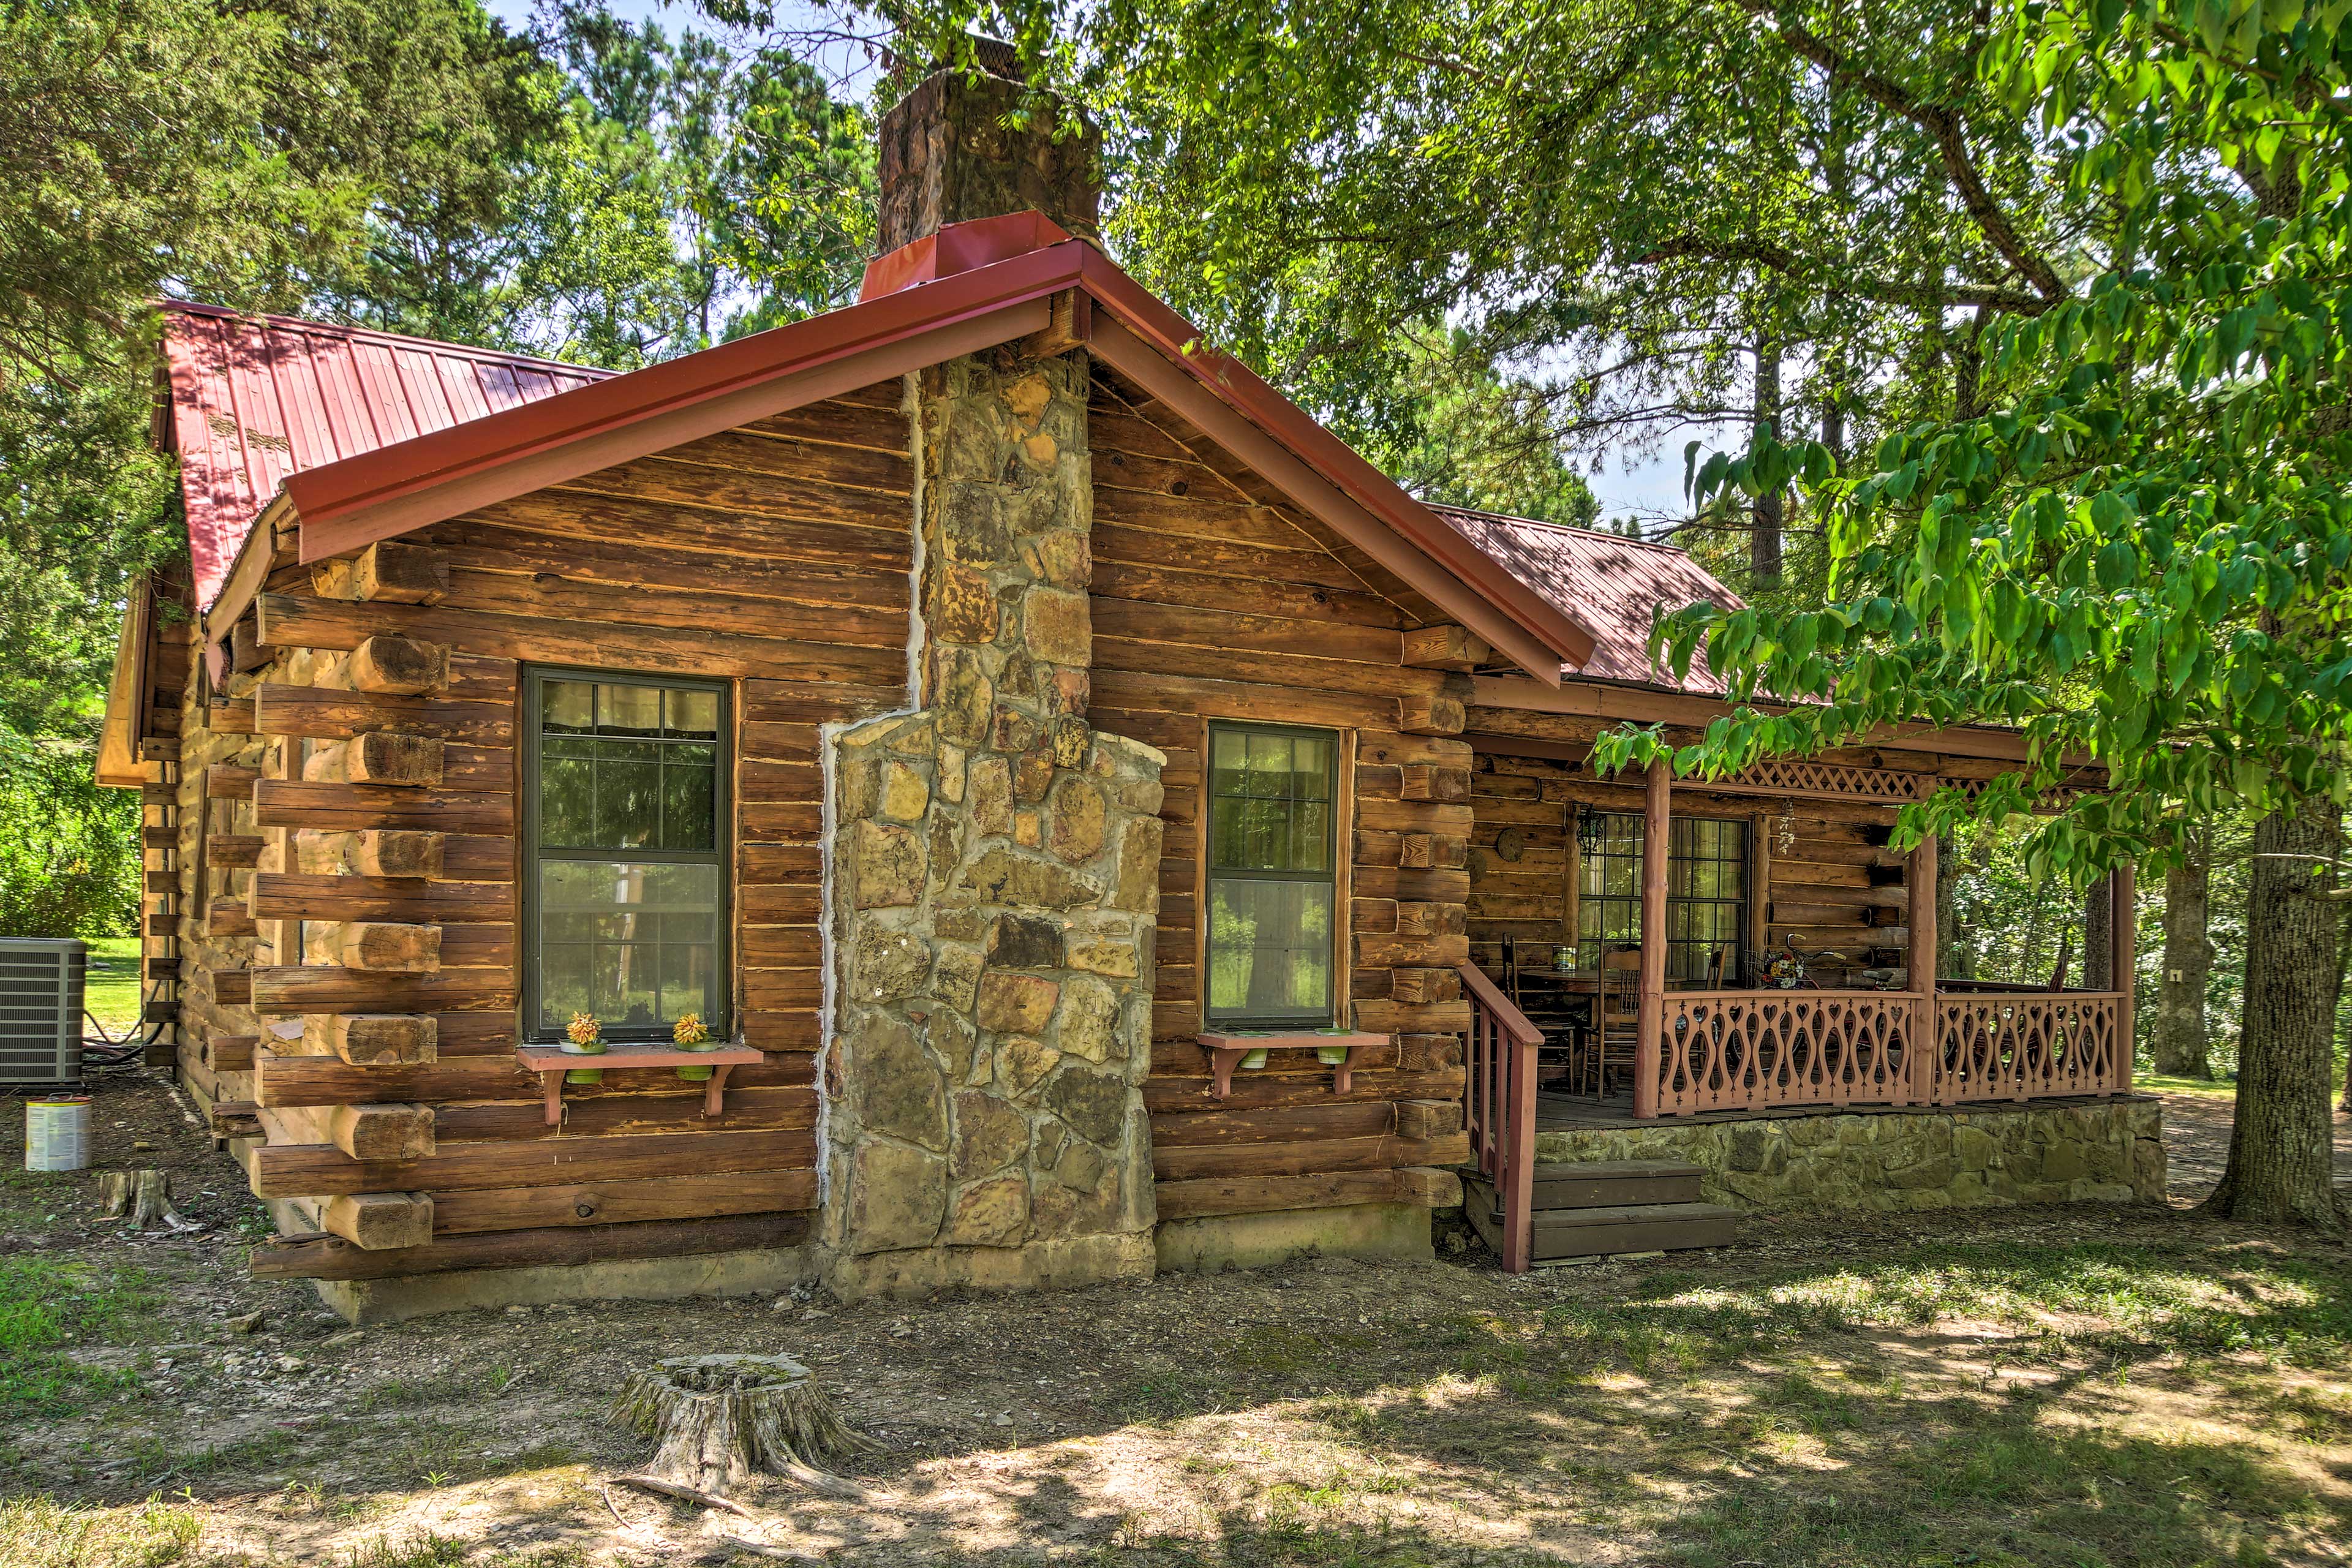 Book this Golden vacation rental as your next getaway.